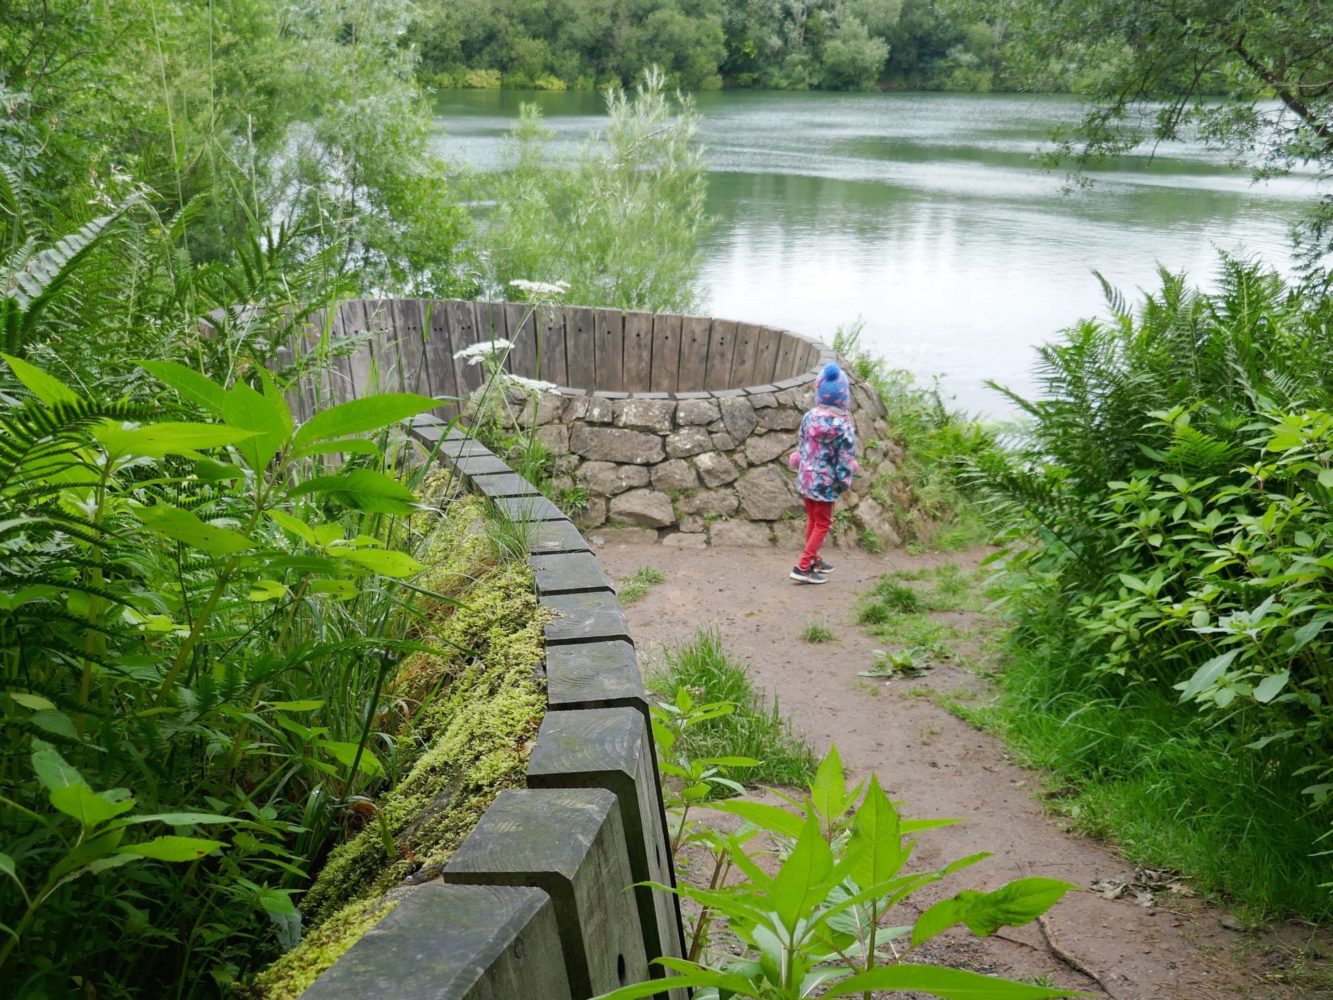 The Lookout at Clifton Country Park, Manchester - One of the family-friendly art walks in the North West